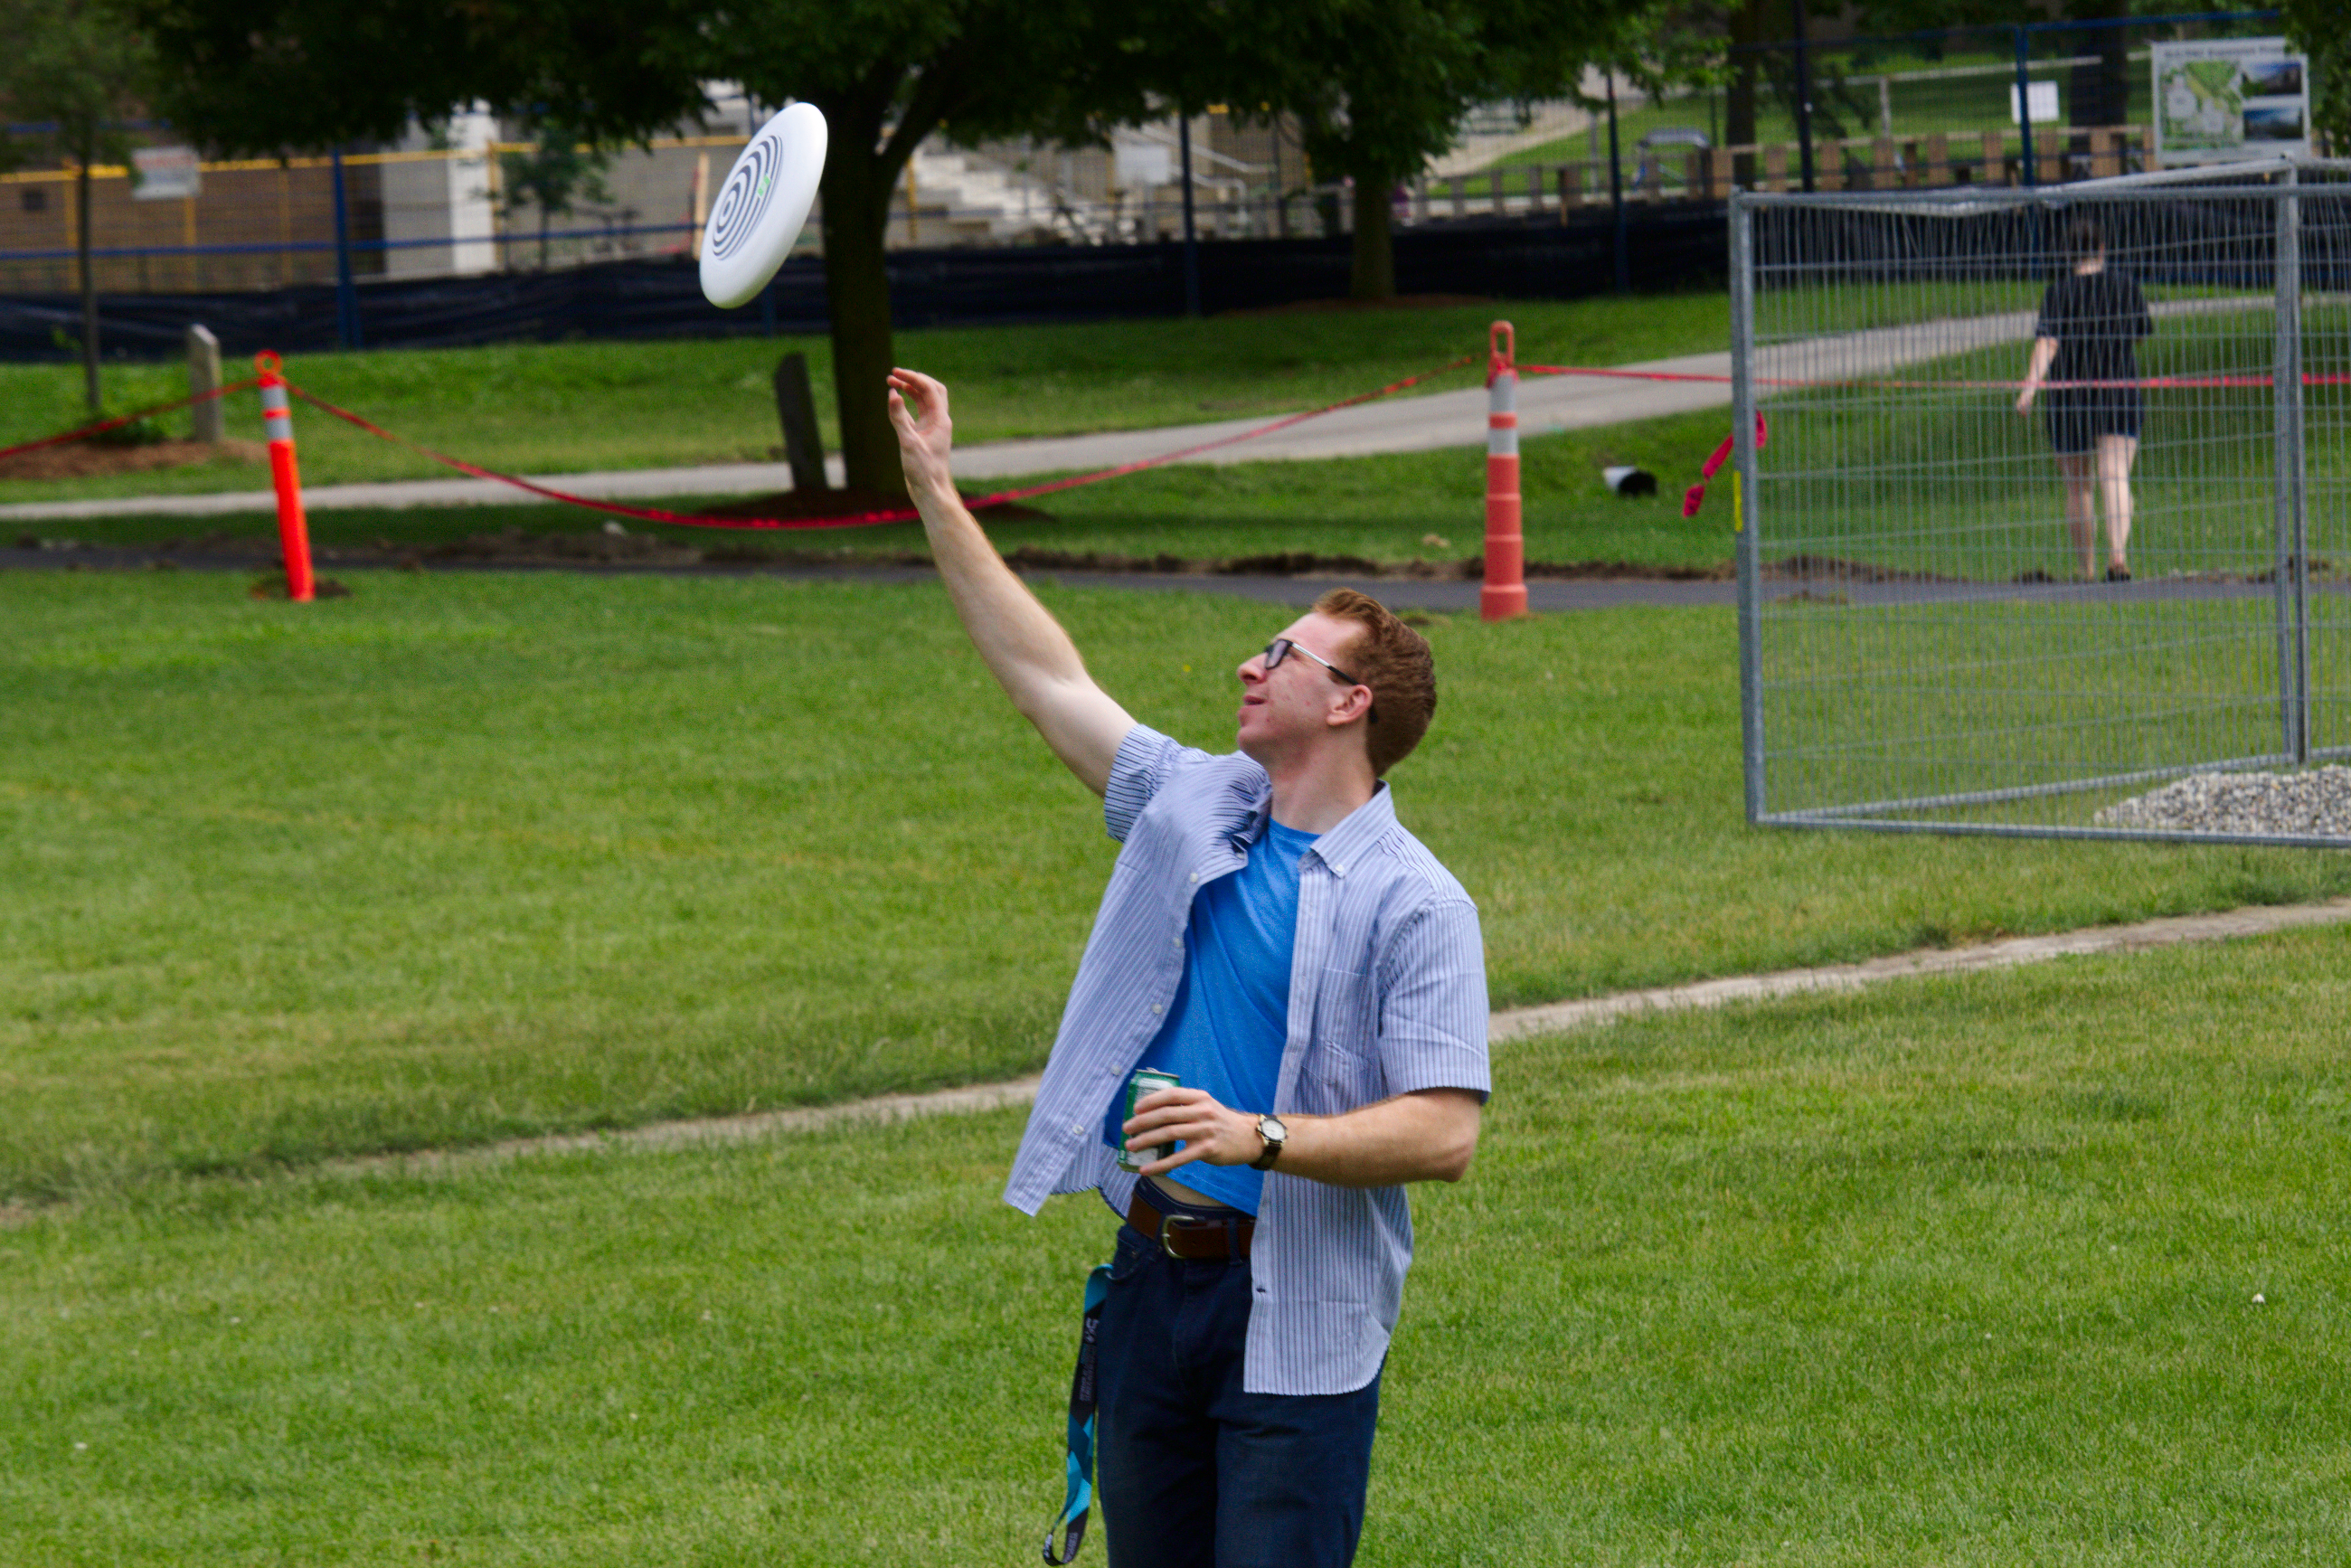 catching frisbee